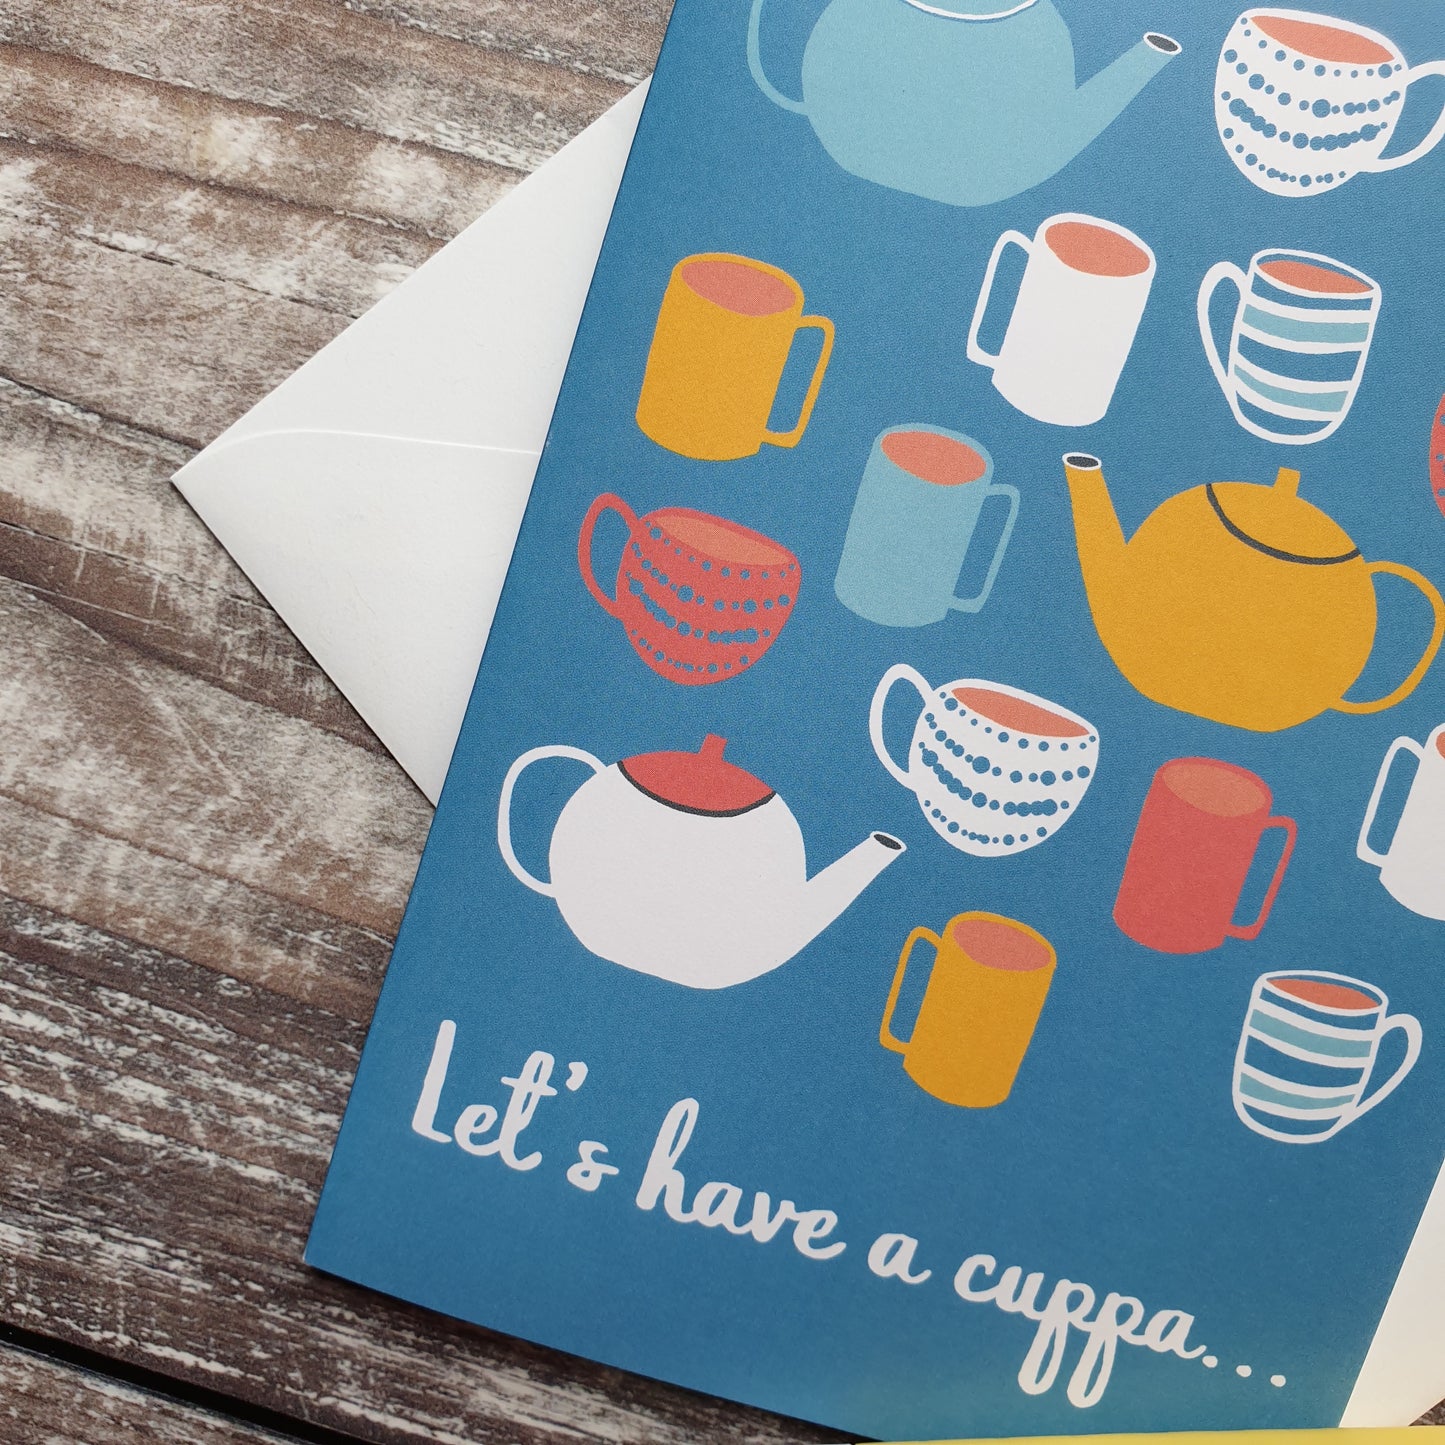 Let's have a cuppa Greeting Card